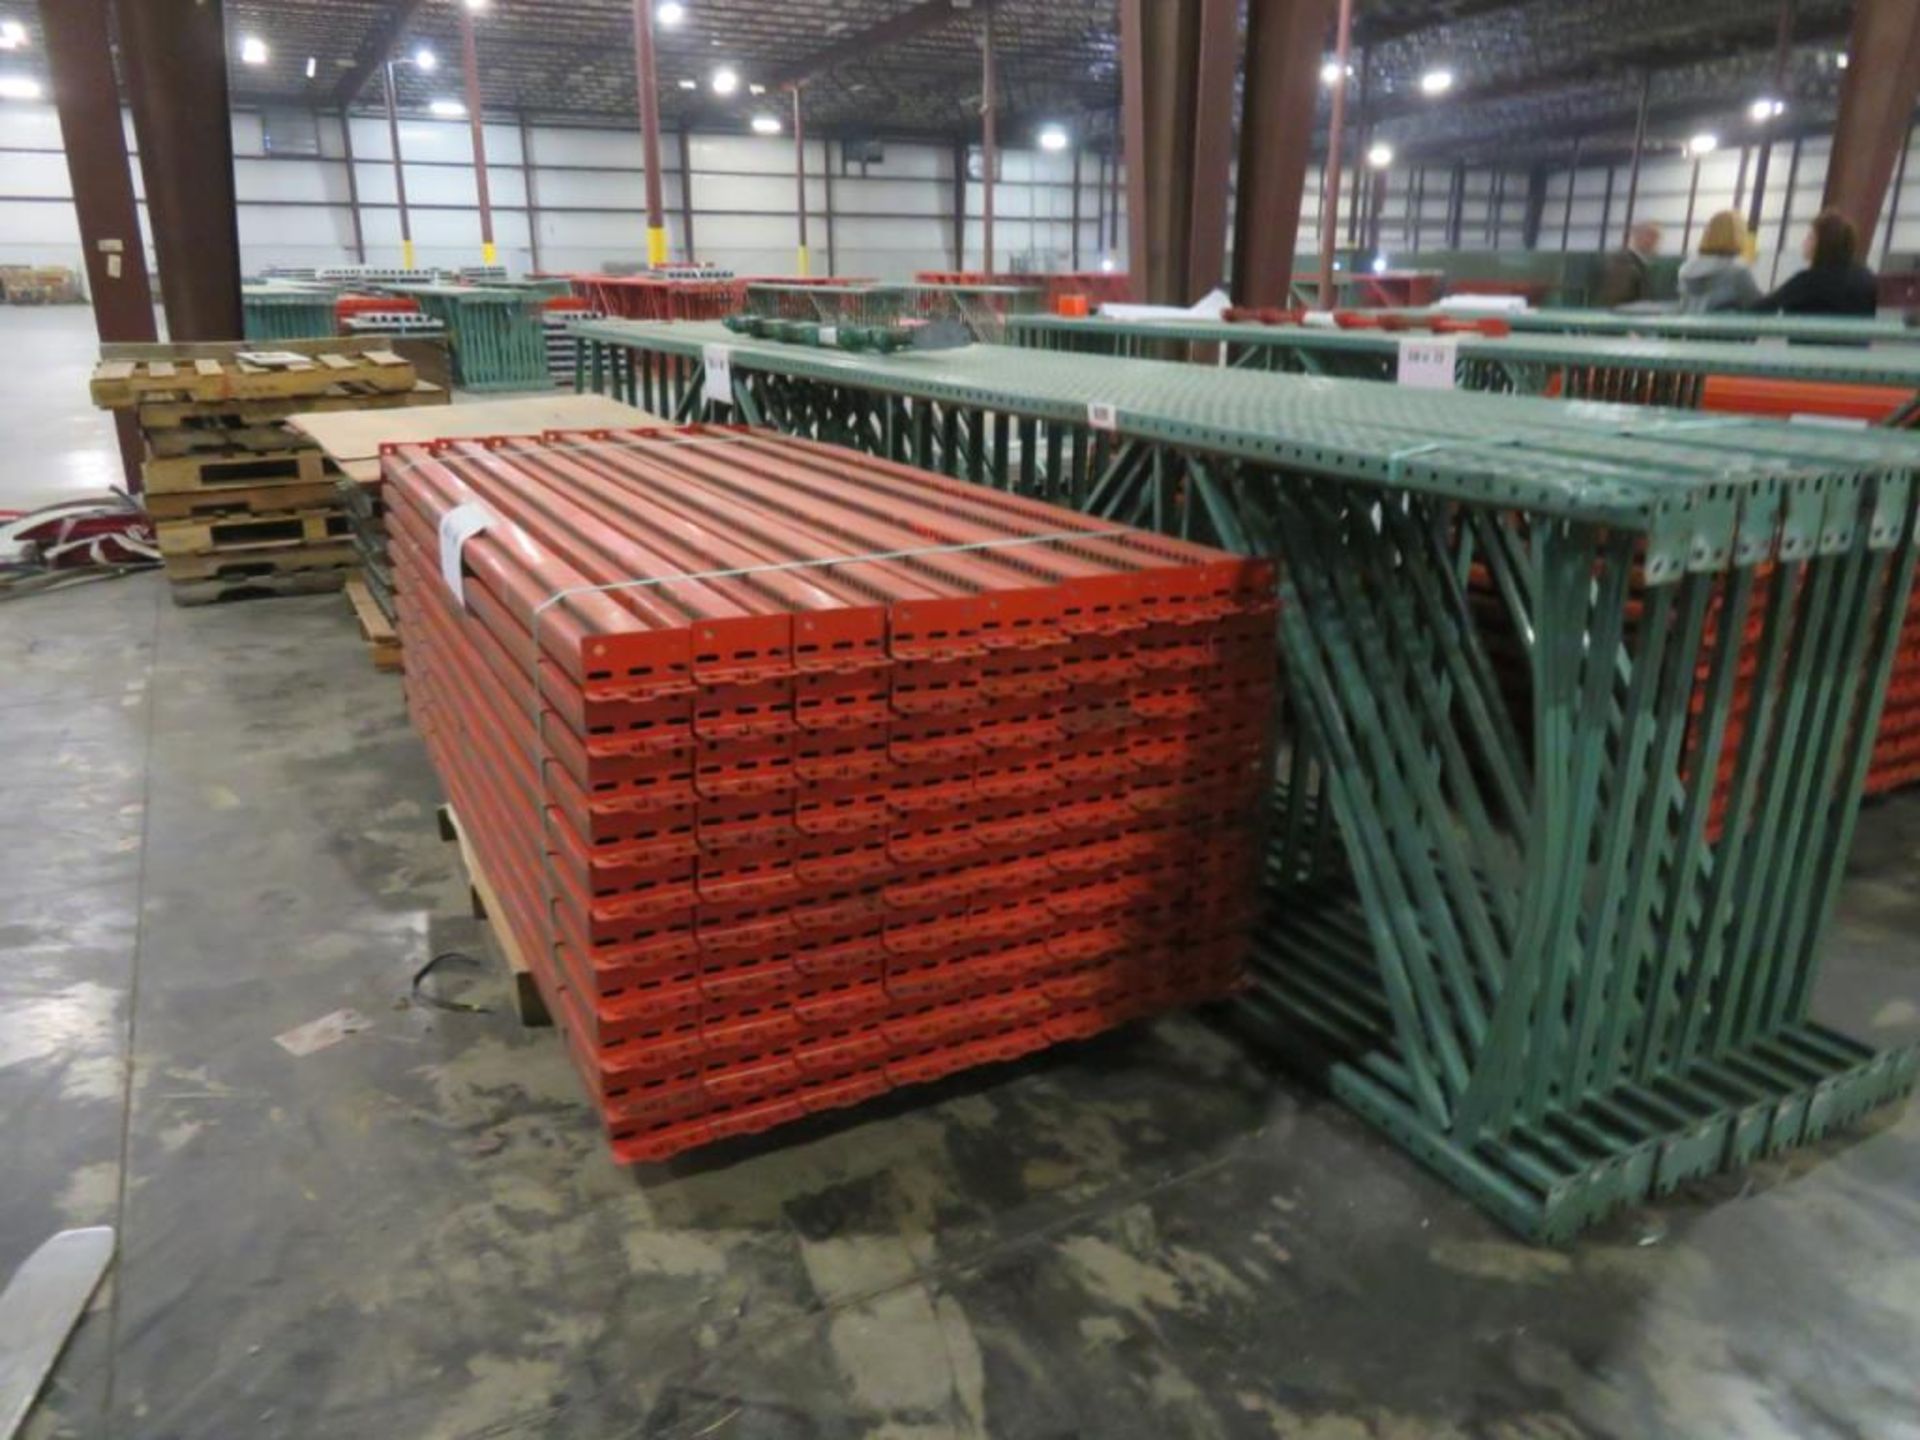 Interlake Pallet Racking 11 uprights 3"x 2 3/4", 44" wide and 20' tall, 80 beams 4" x 2 3/4" & 8' - Image 7 of 7